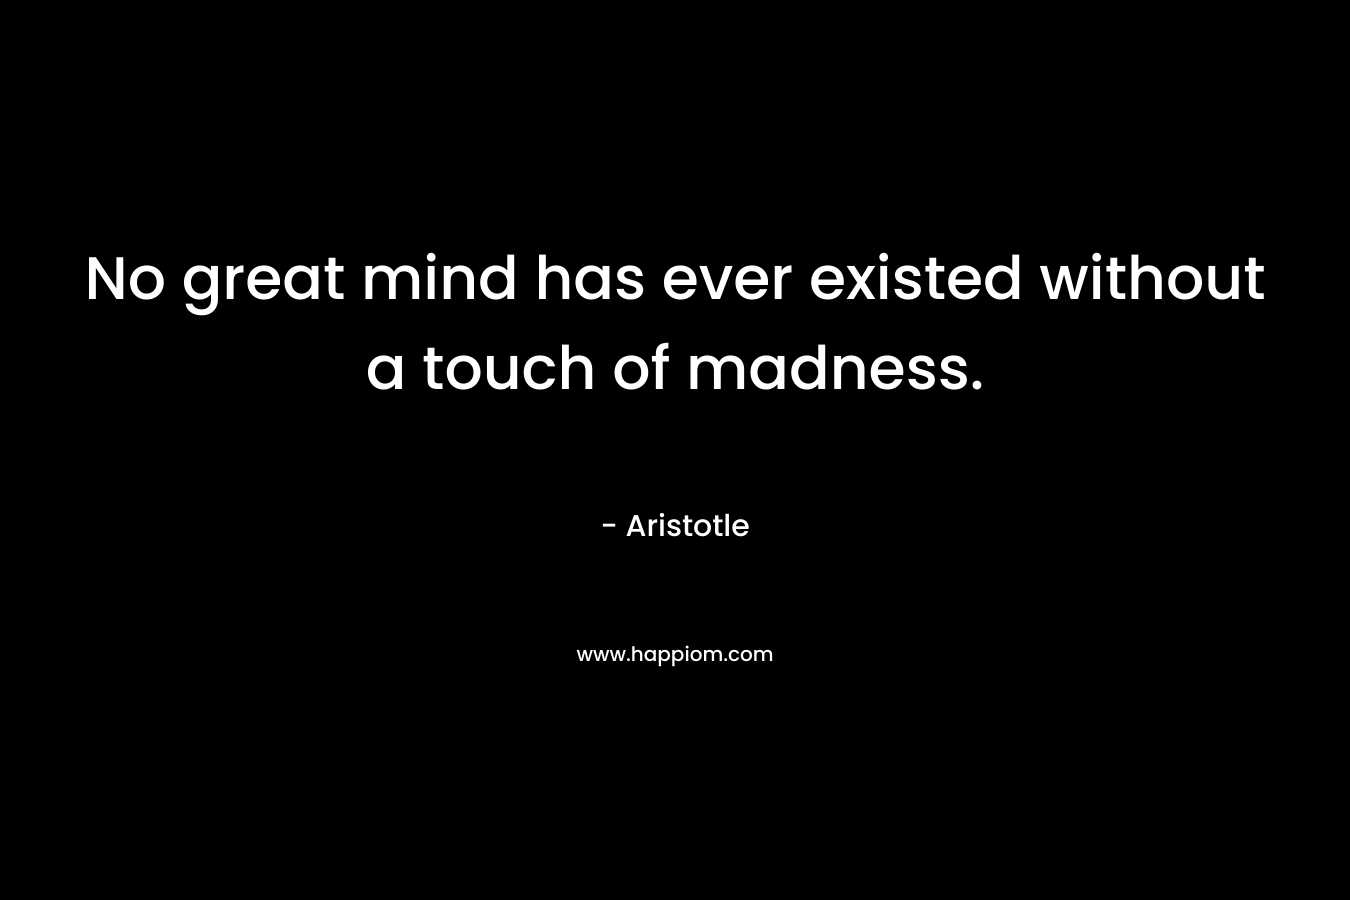 No great mind has ever existed without a touch of madness. – Aristotle